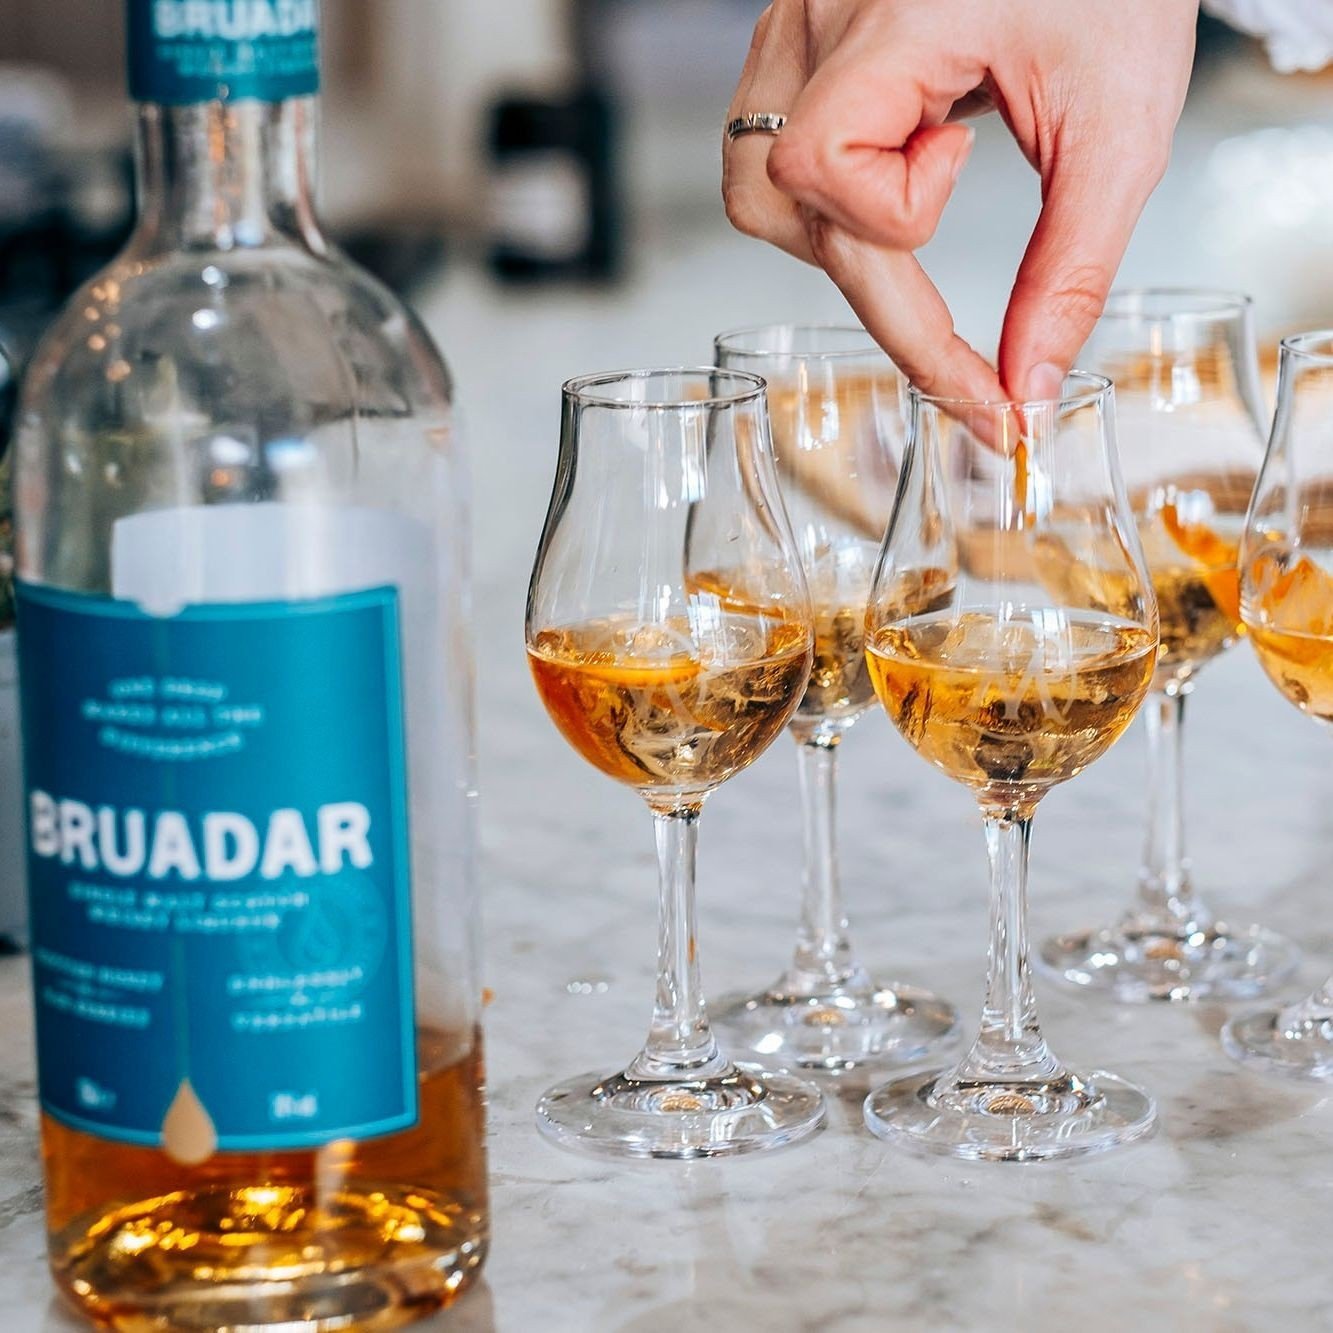 Fancy a discount? of course you do!🥃⁠
⁠
Over the next 7 days we have 10% off on Amazon in celebration of Bee Day on 20th May.⁠
⁠
Grab a bottle of Bruadar for an absolute steal and enjoy some ice-cold serves in the sun ☀️⁠
⁠
Click the link in our bio